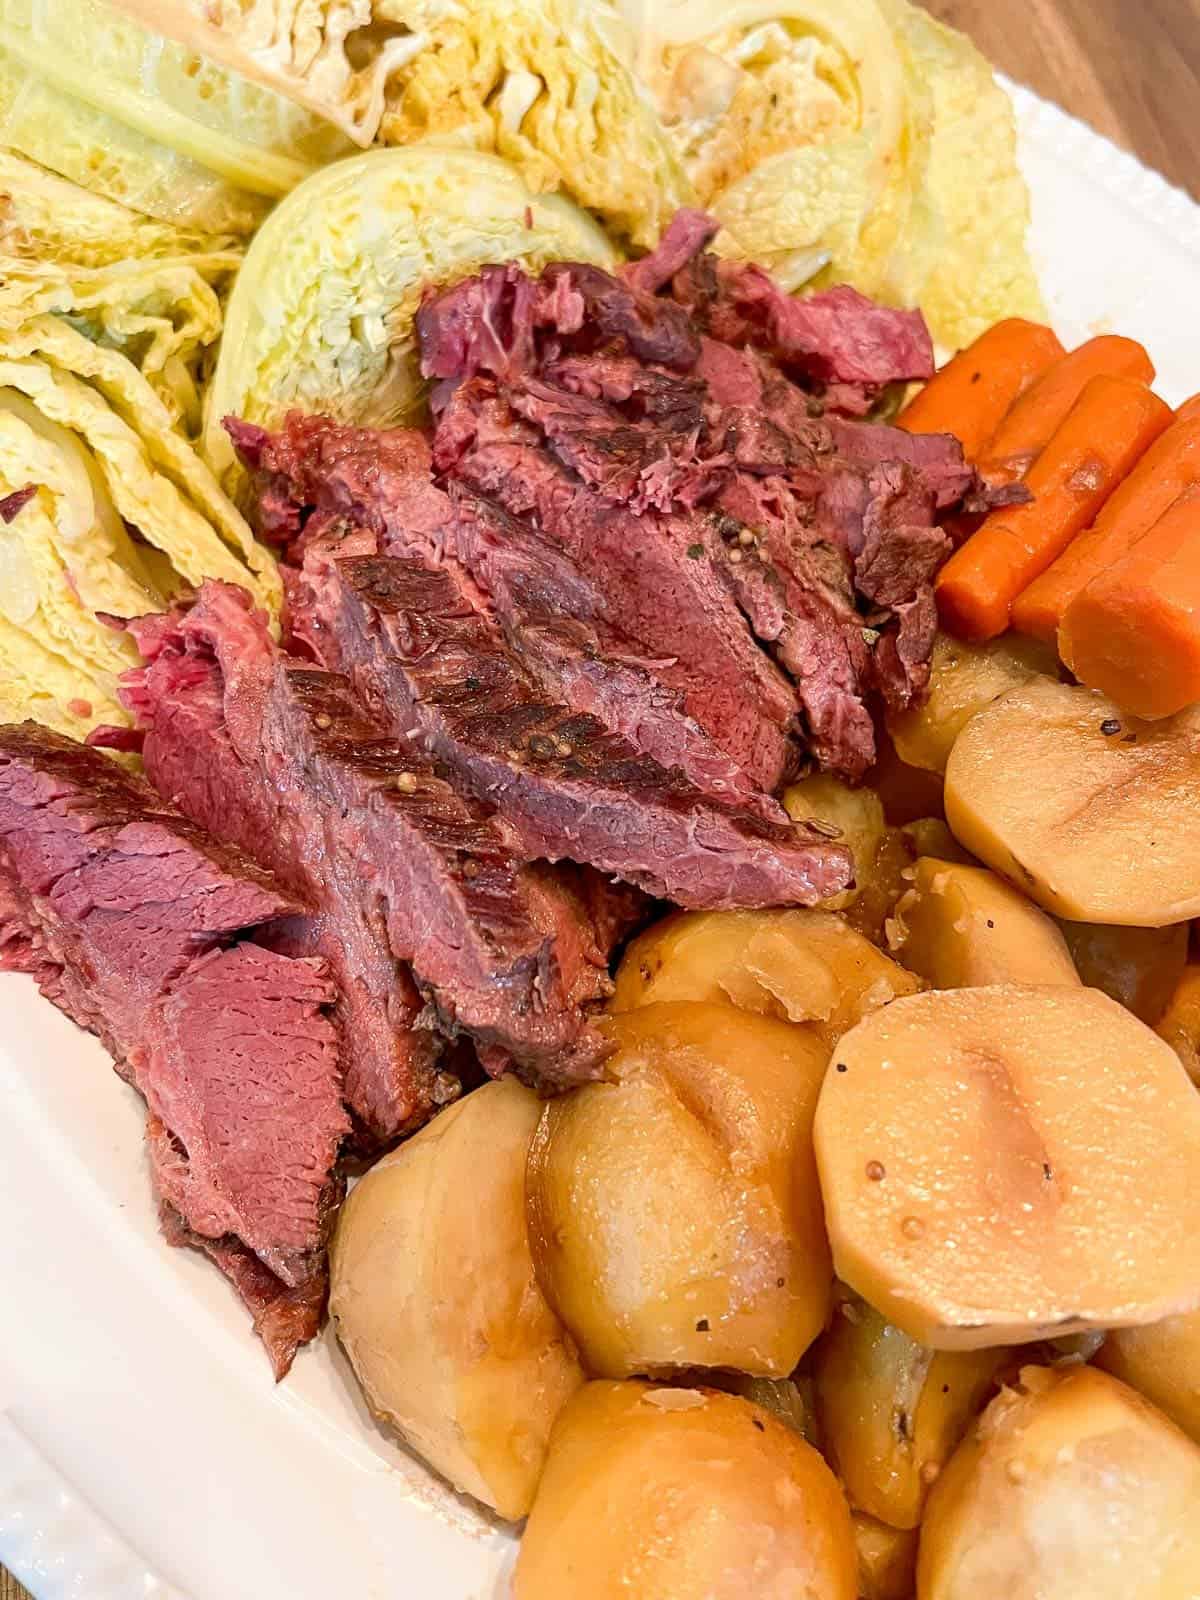 corned beef hash on a platter served with potatoes and carrots